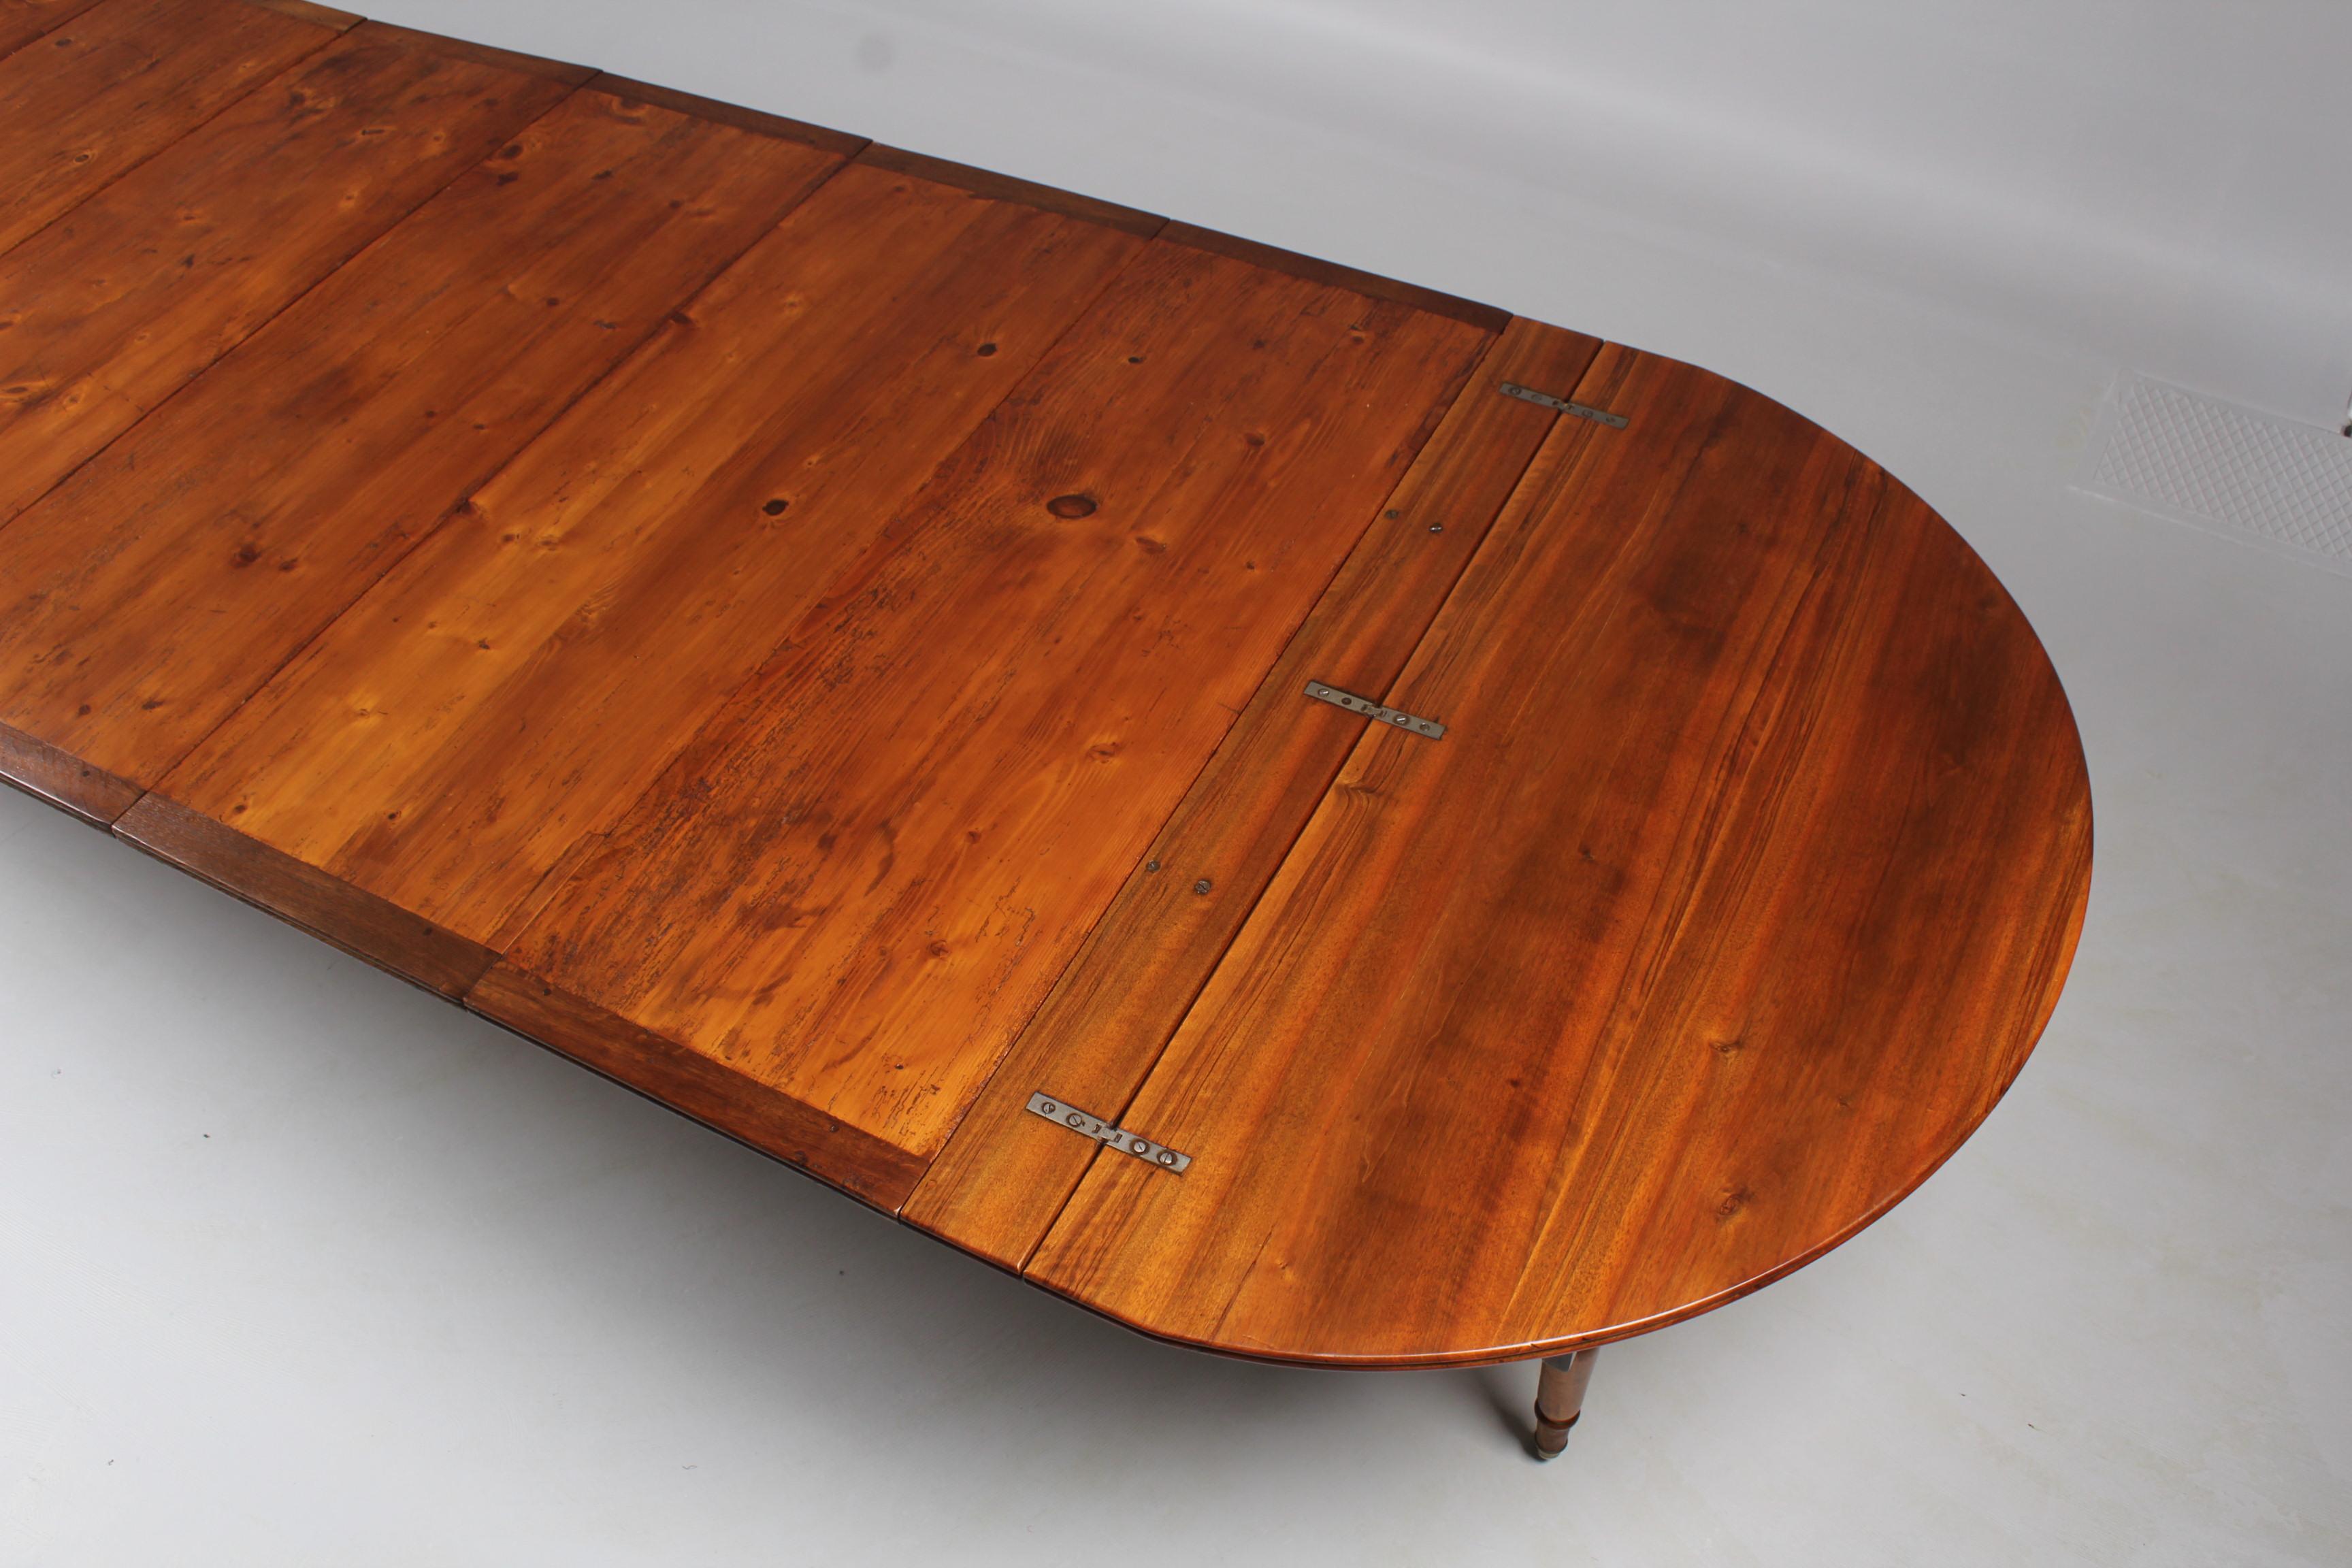 Large 19th Century Dining Table, Walnut, 12-16 People 7